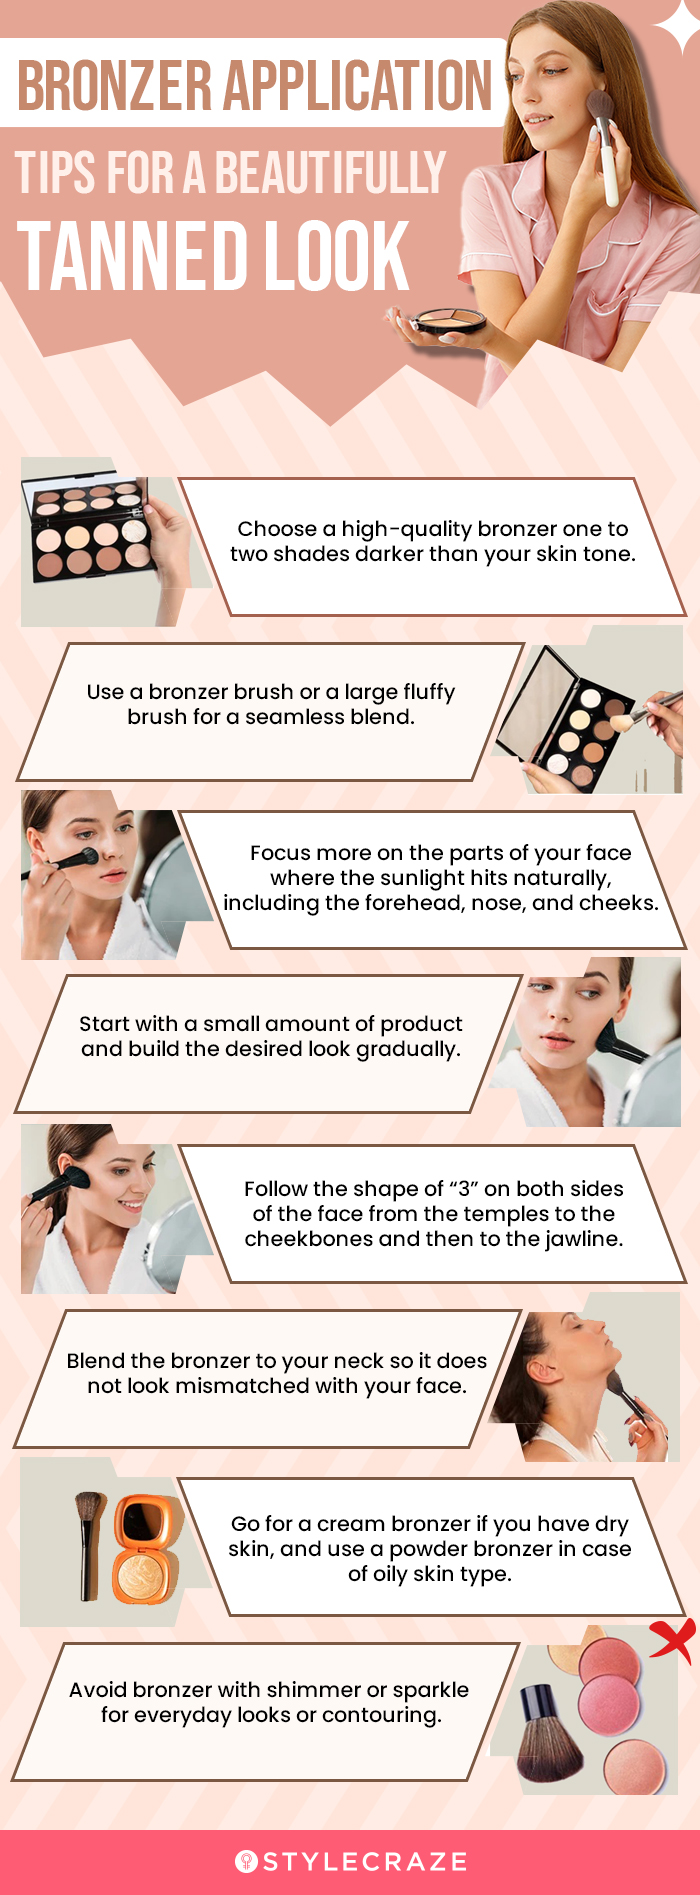 Bronzer Application Tips For A Beautifully Tanned Look (infographic)